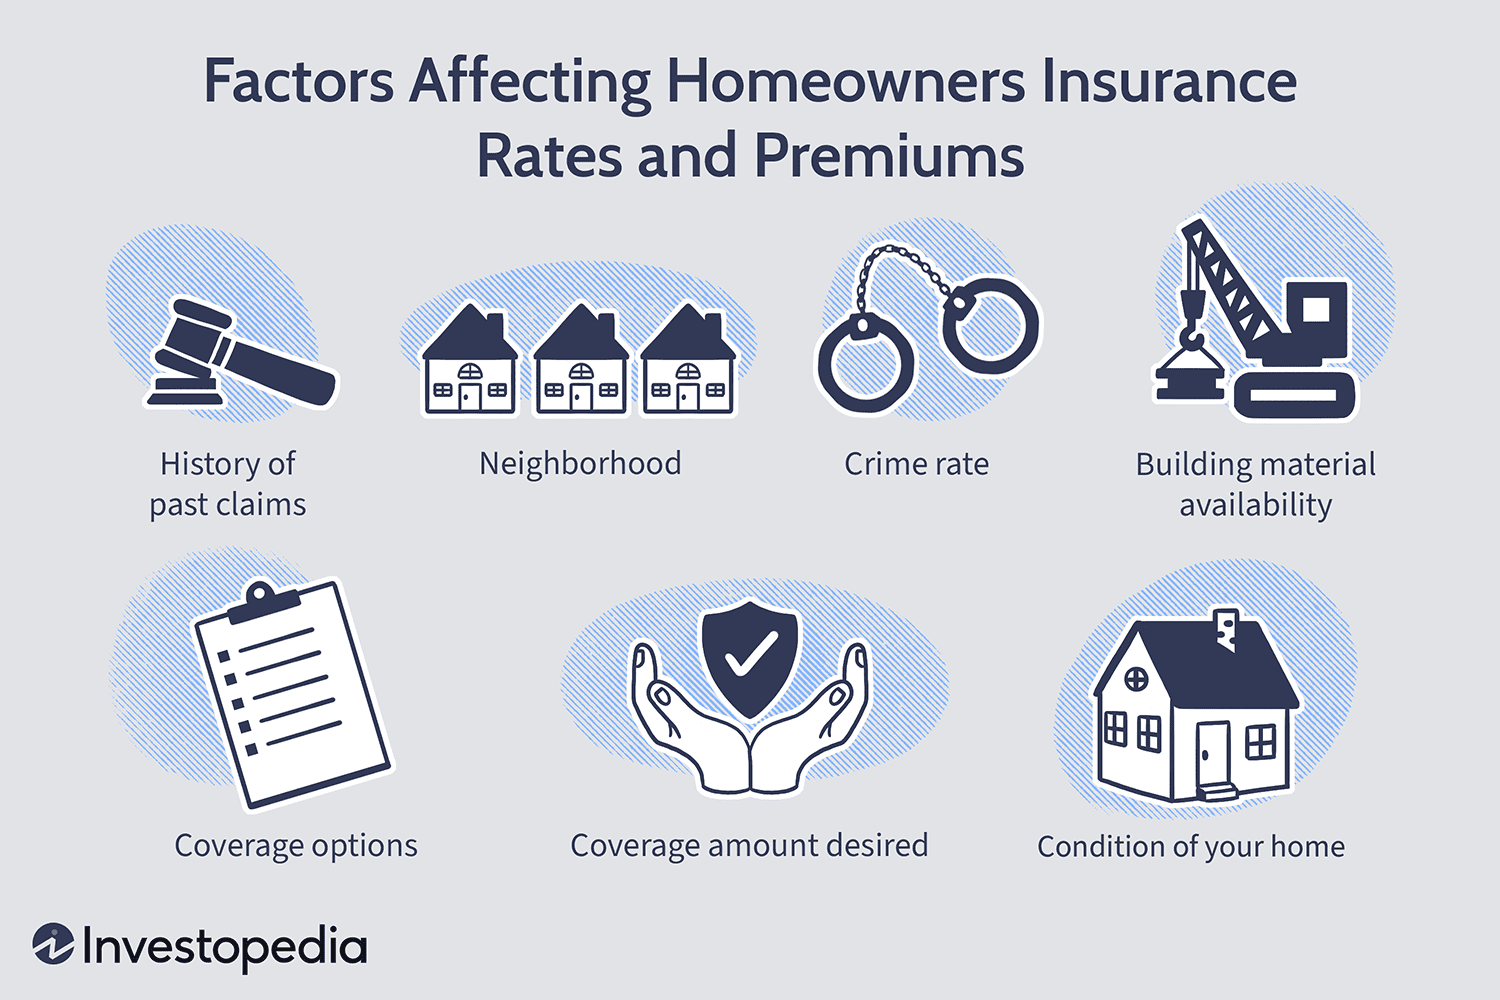 The Ultimate Guide to Getting the Best Auto and Home Insurance Quotes Online